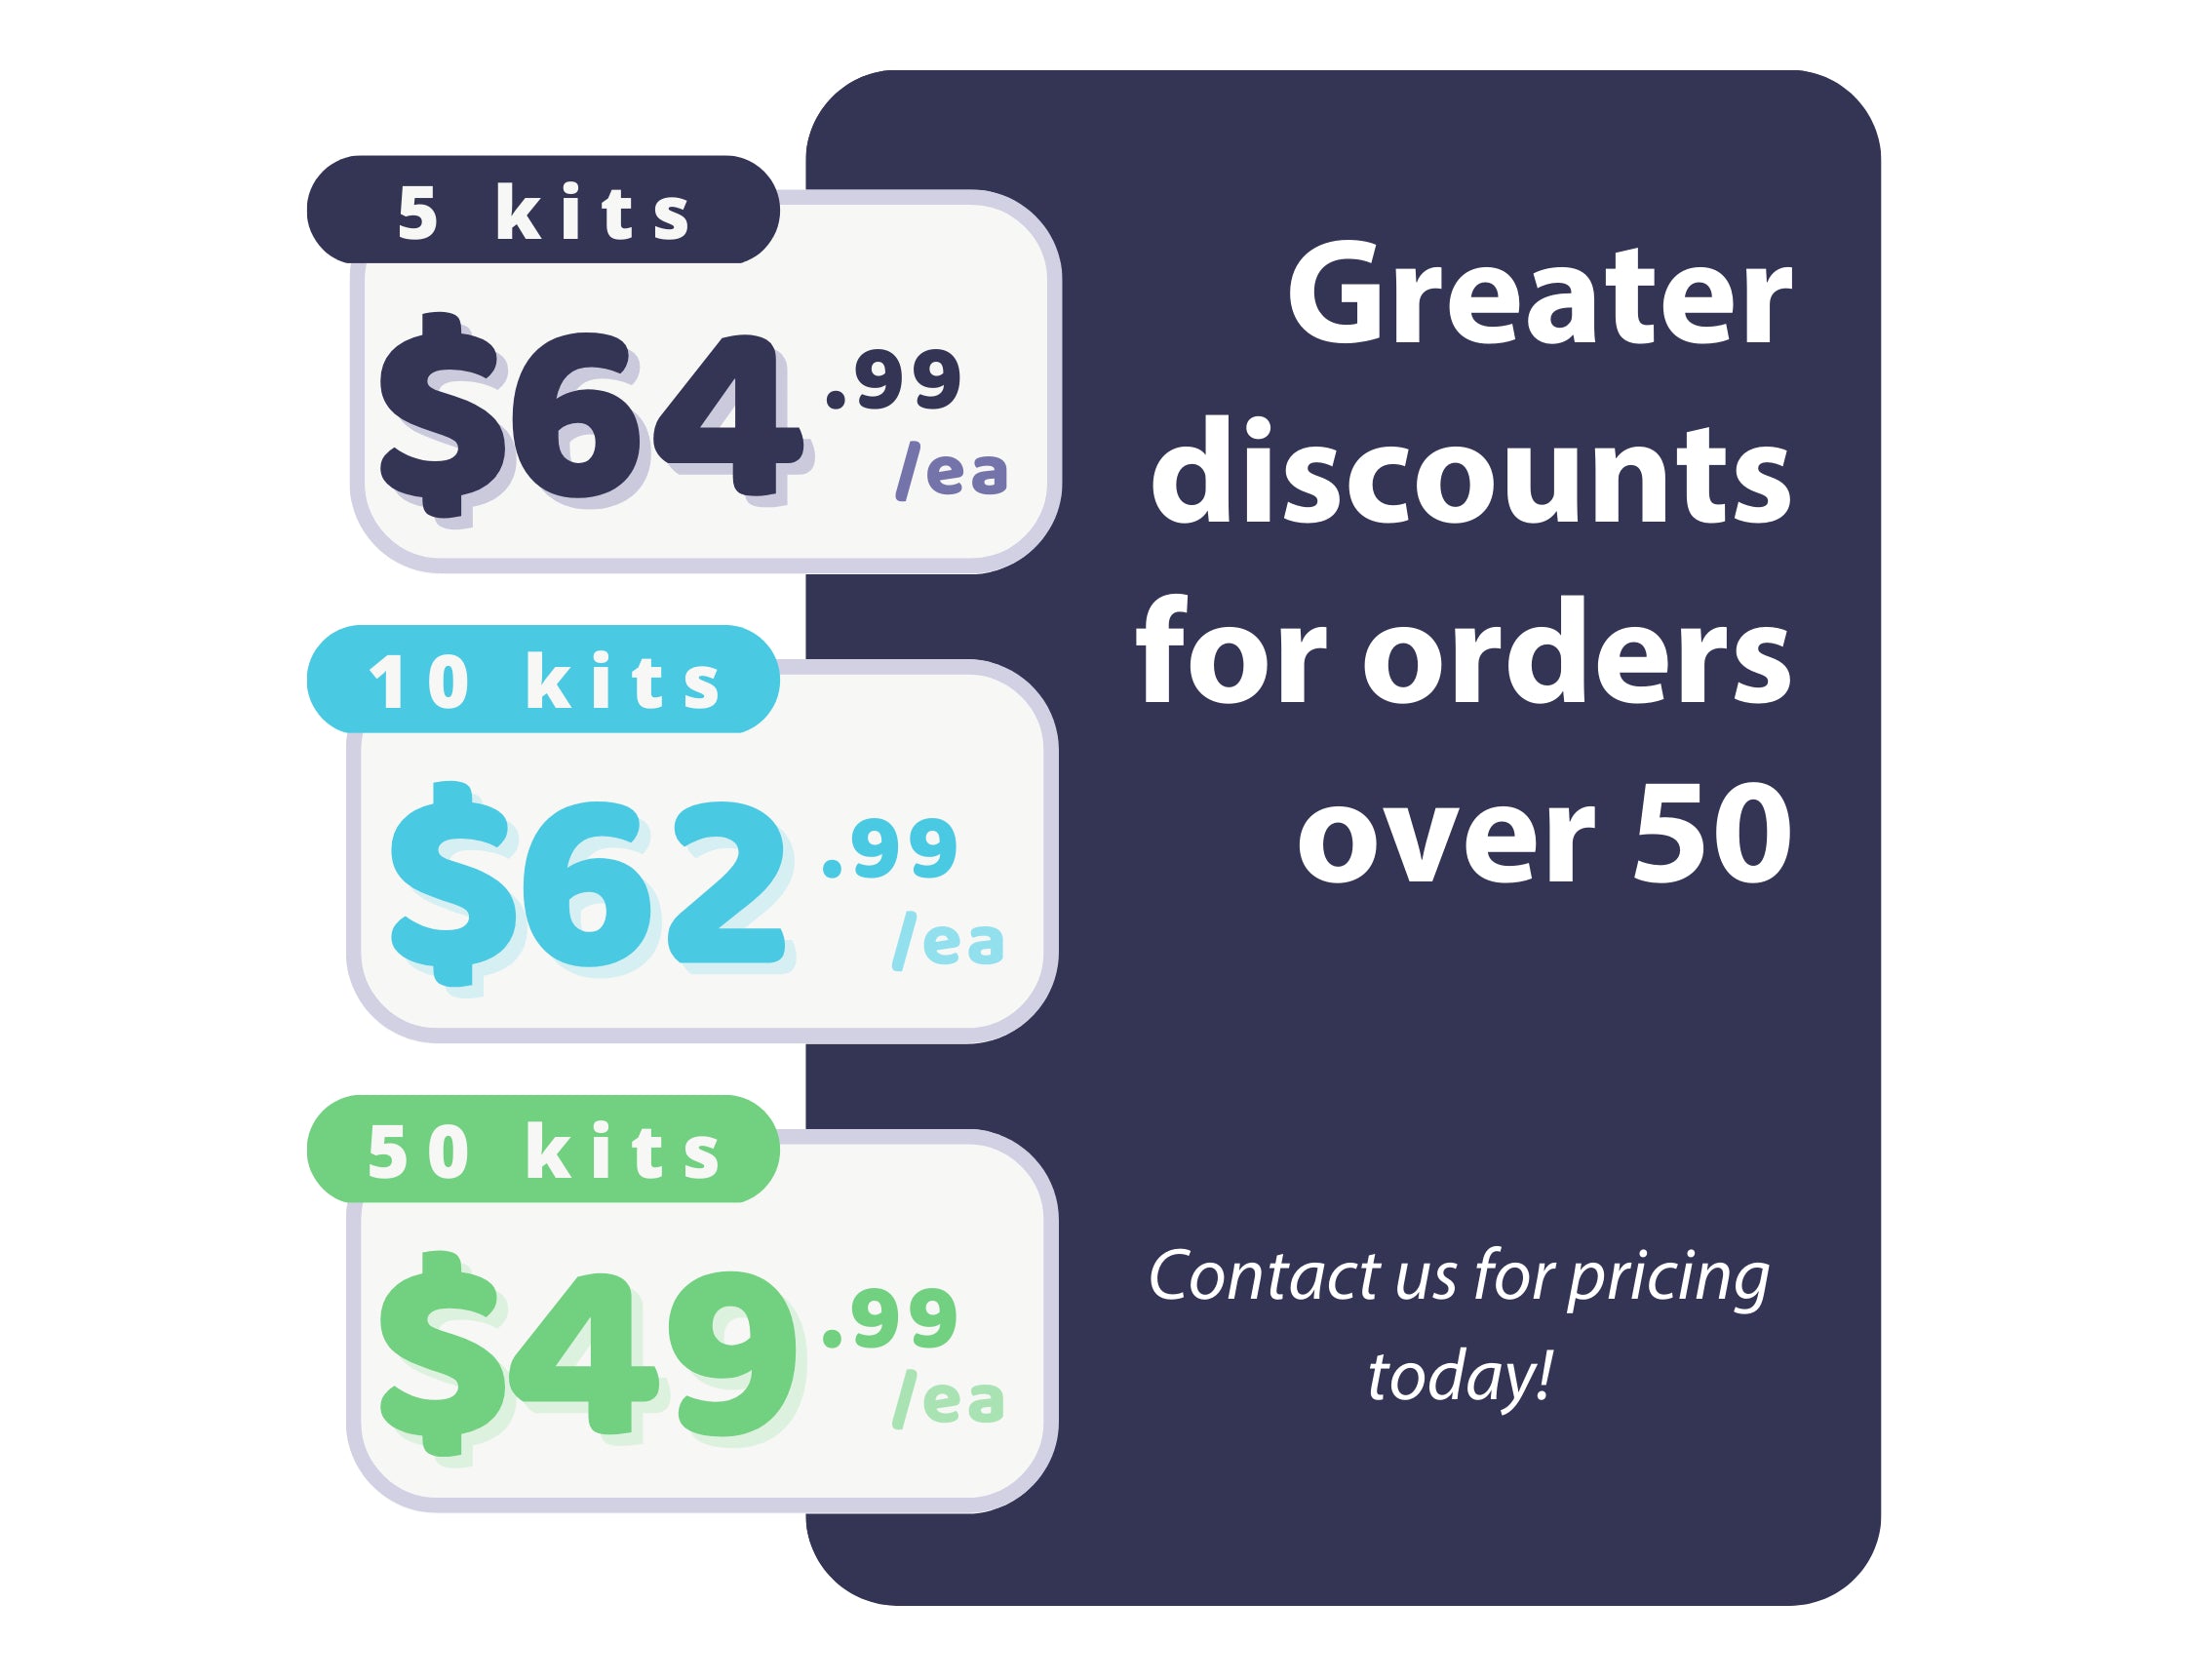 Wholesale bundles of kits start at a $15 discount. Save up to 40% with quantity discounts